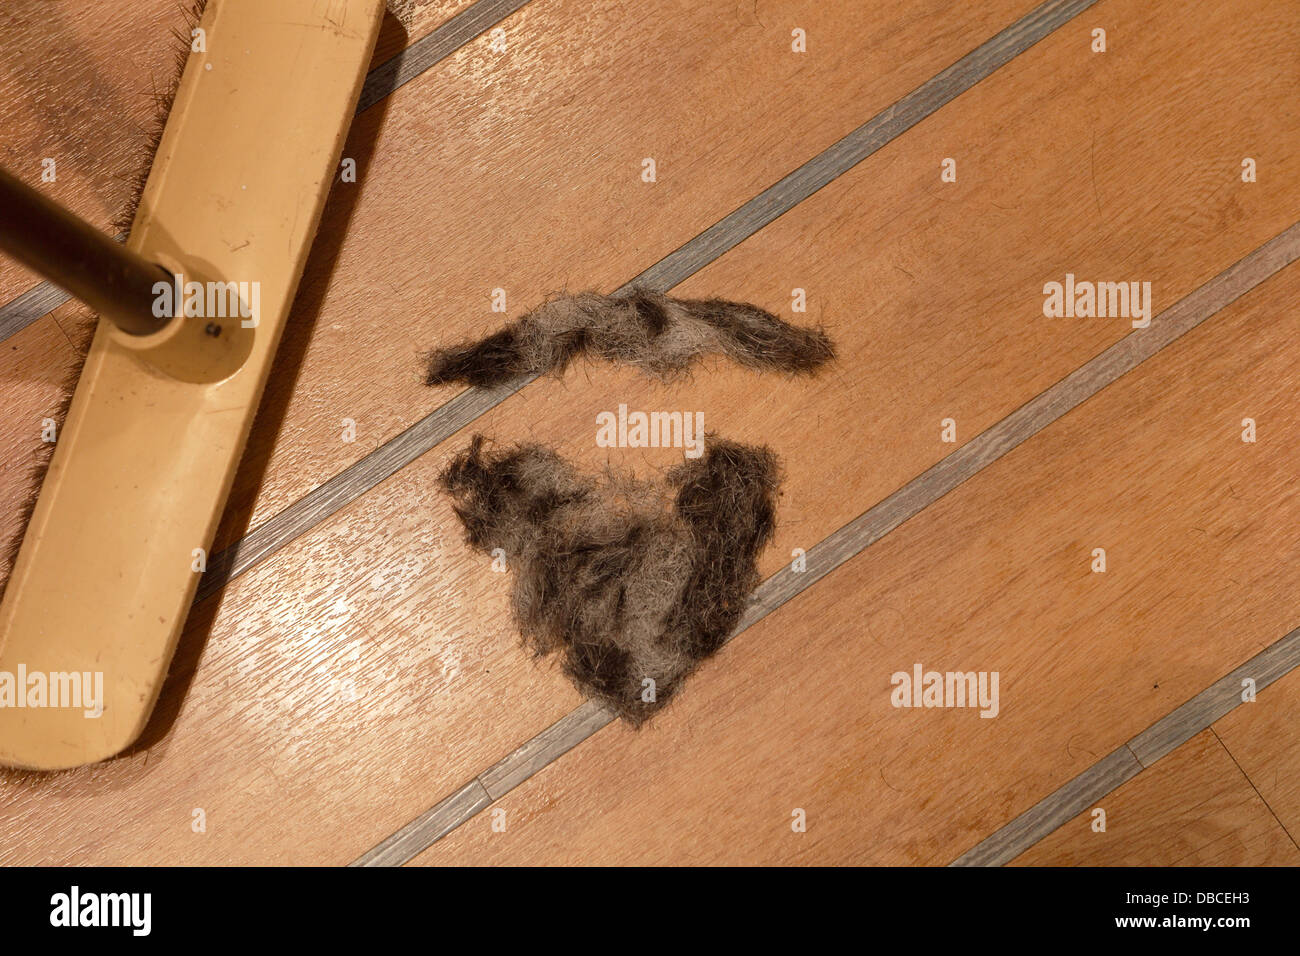 Hair cuttings on the floor swept together to make a moustache mustache and beard shape Stock Photo